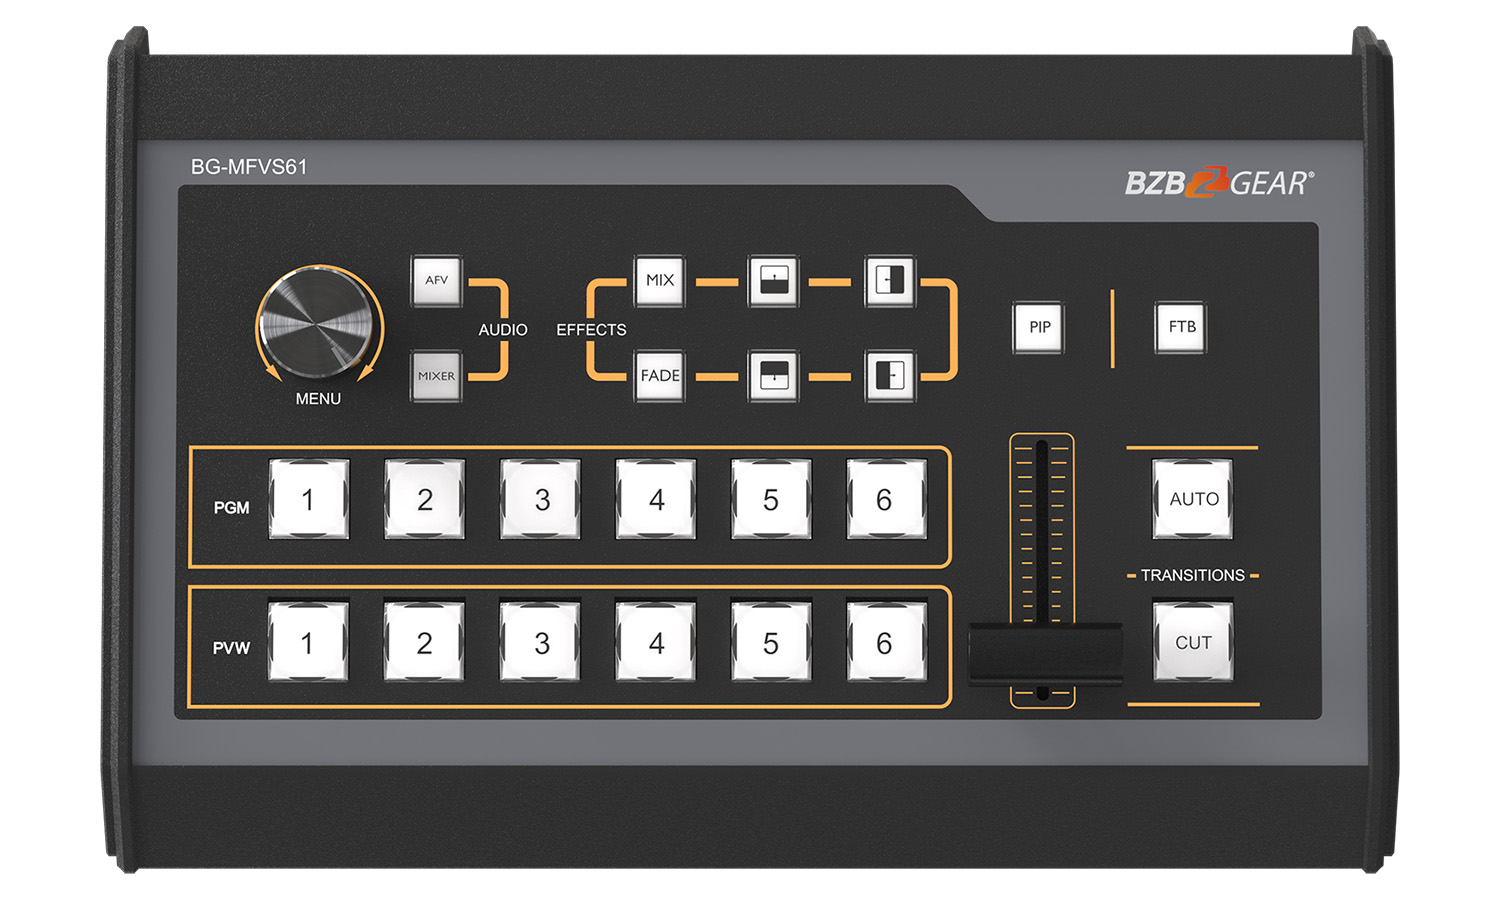 BG-MFVS61-G2 6-Channel 1080P FHD SDI/HDMI Multi-Format Video Switcher Mixer with PIP and USB 3.0 Capture by BZBGEAR